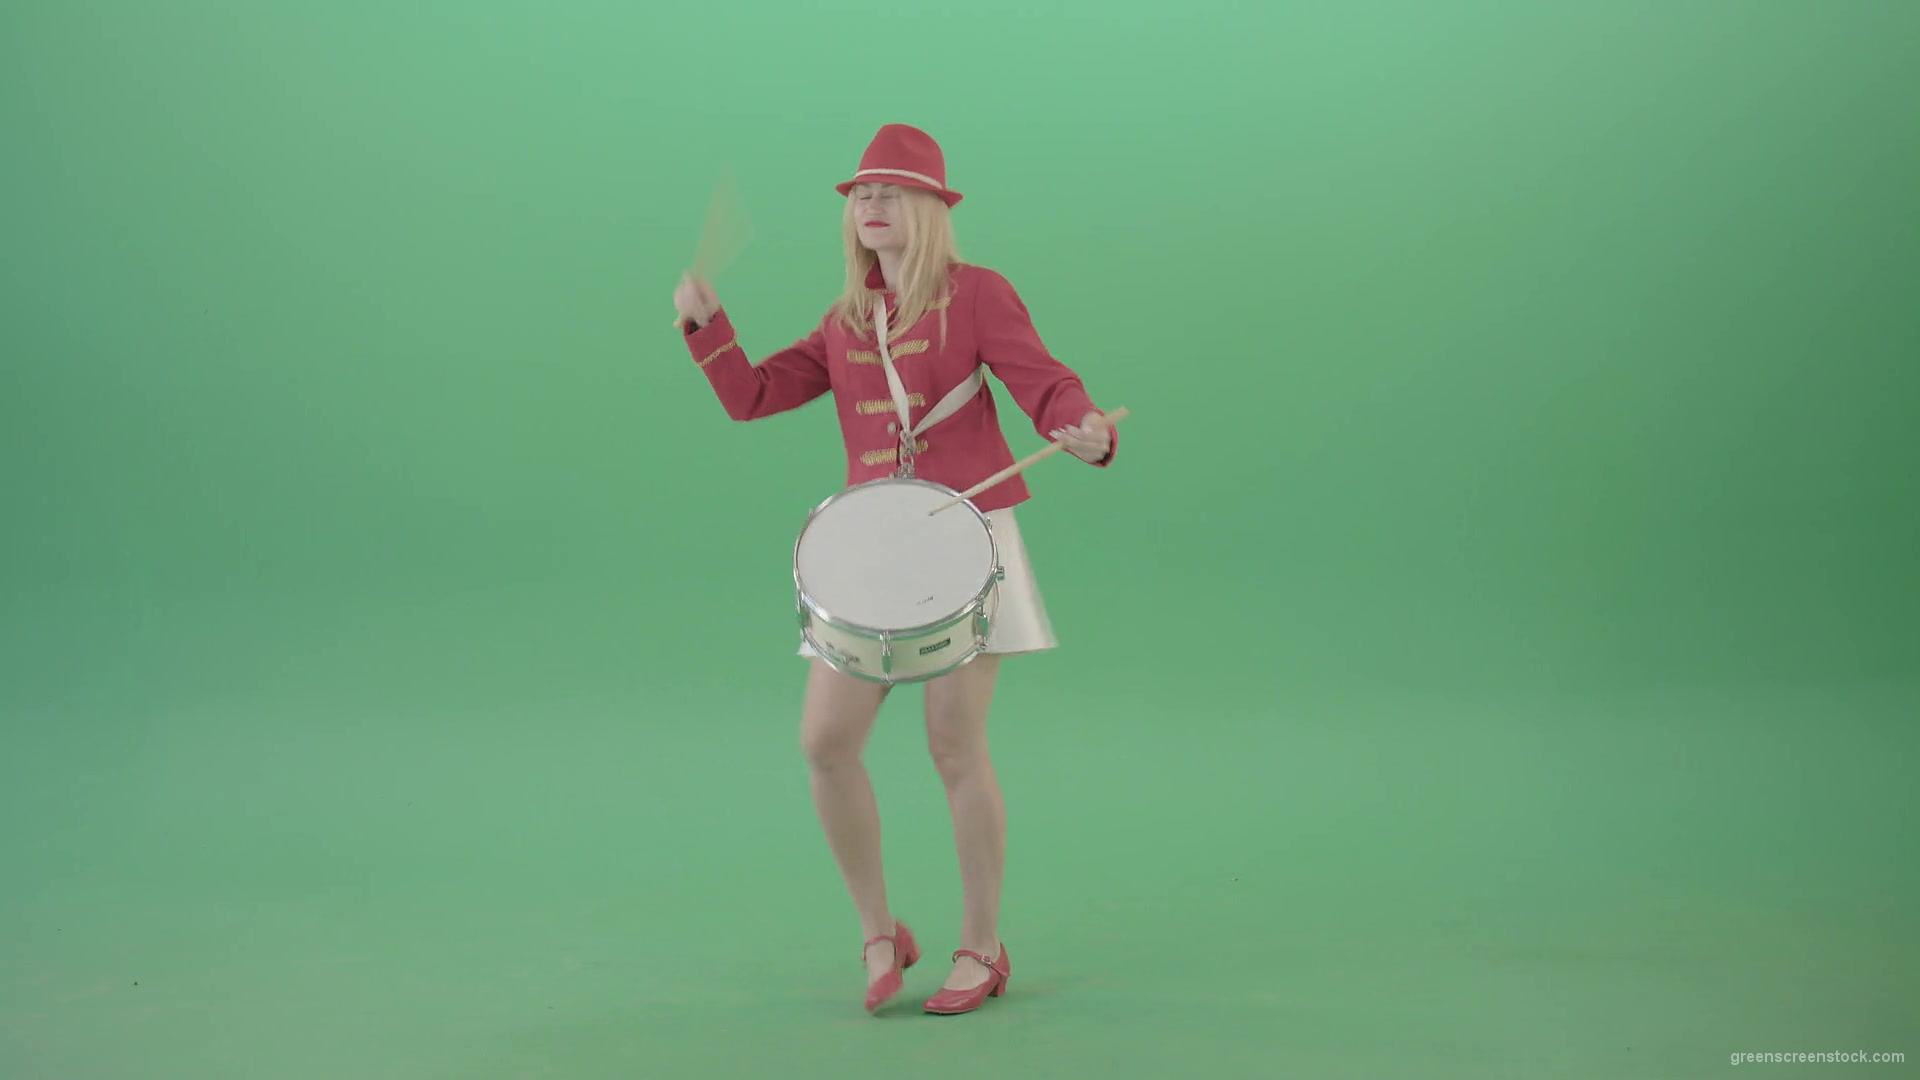 Girl-marching-and-spinning-playind-drums-on-green-screen-4K-Video-Clip-1920_009 Green Screen Stock